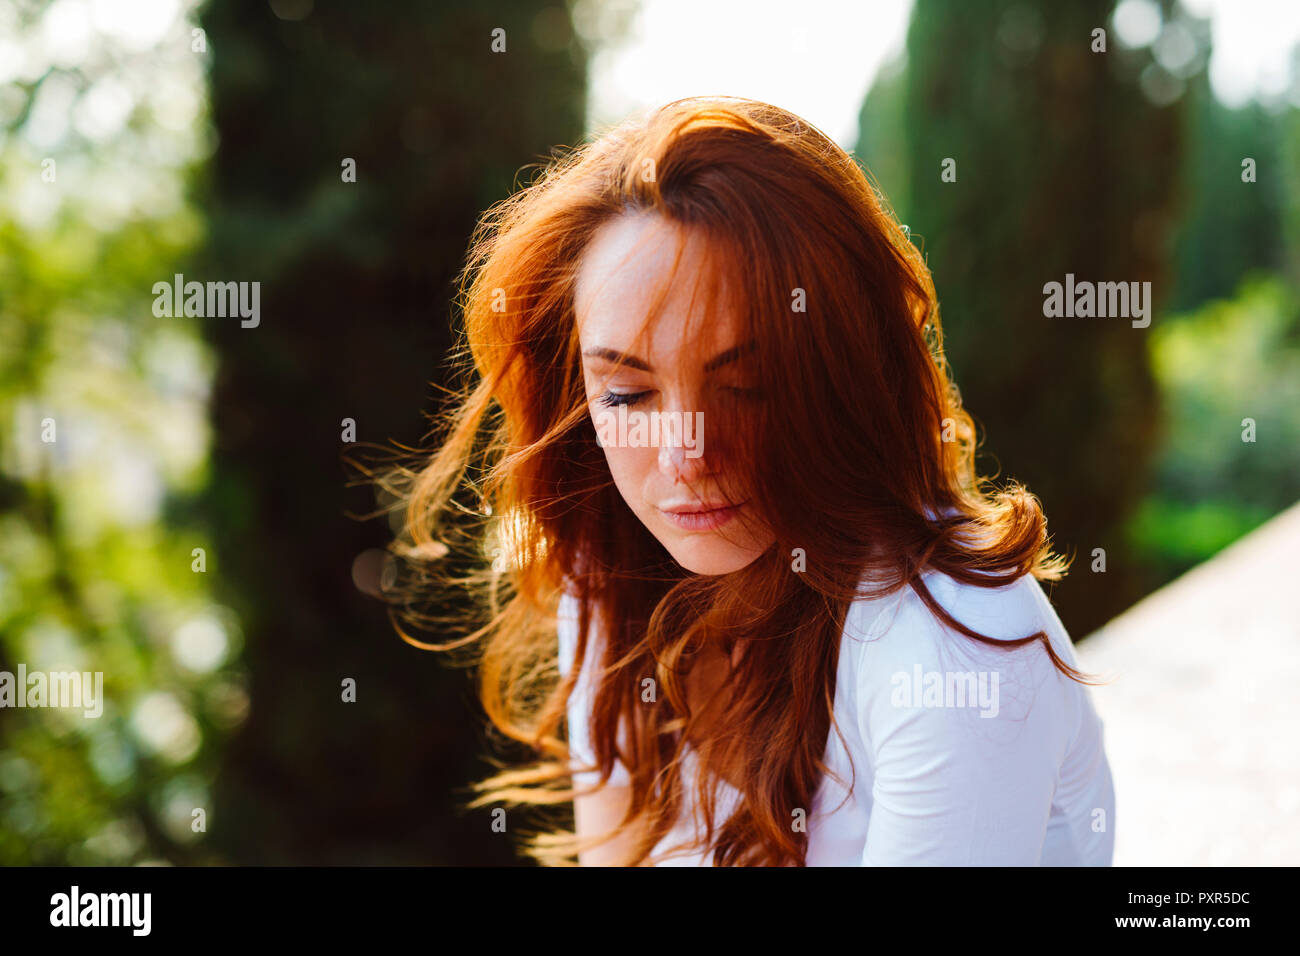 Portrait of redheaded woman at backlight Stock Photo